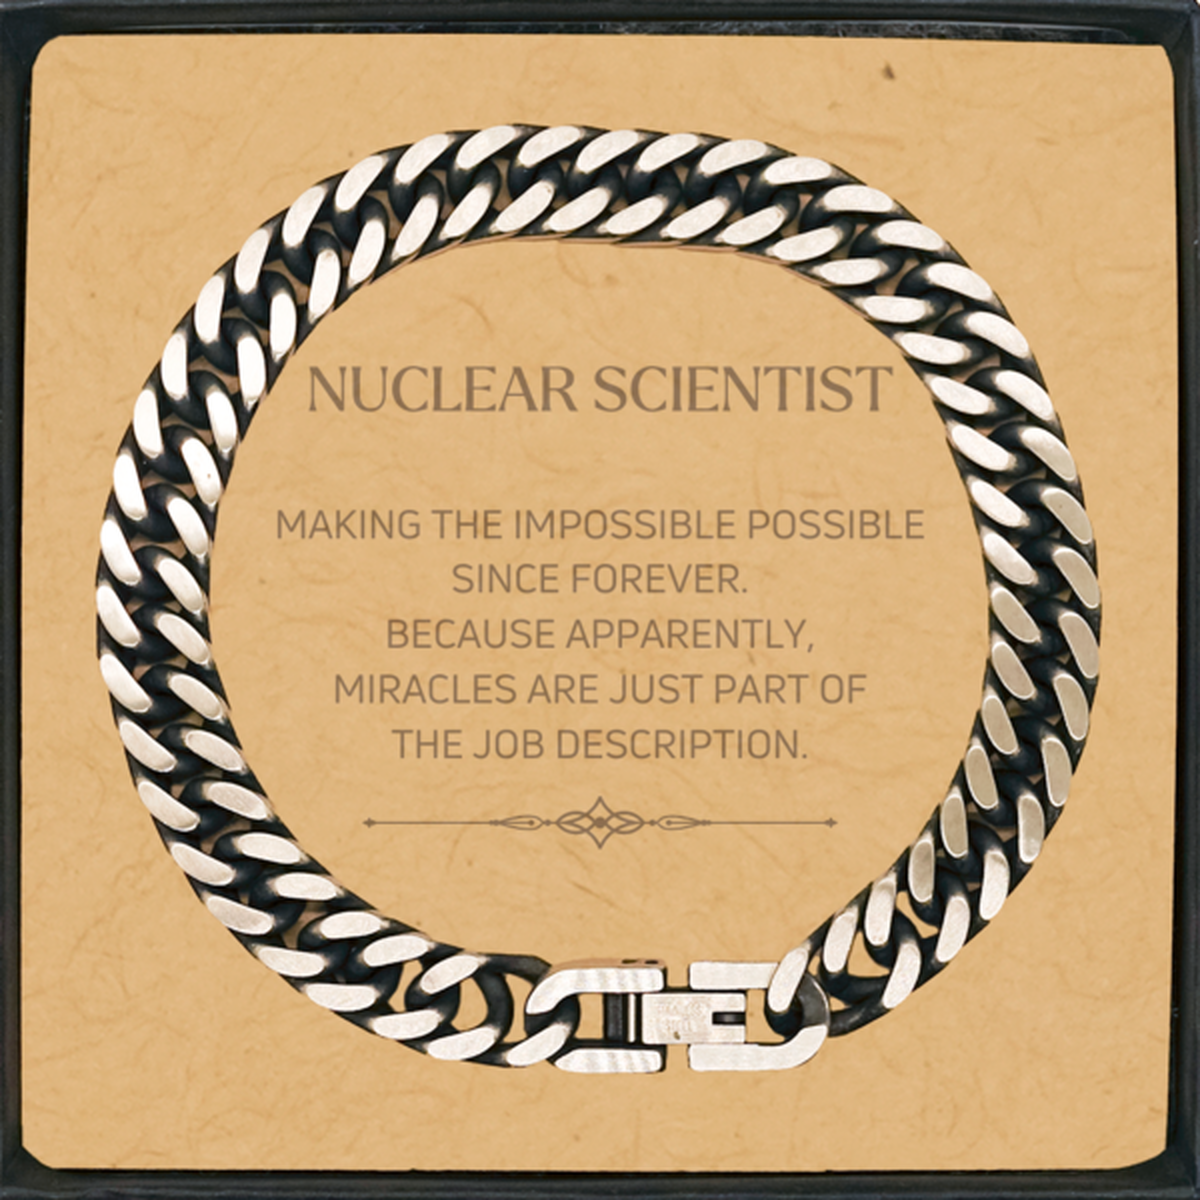 Funny Nuclear Scientist Gifts, Miracles are just part of the job description, Inspirational Birthday Cuban Link Chain Bracelet For Nuclear Scientist, Men, Women, Coworkers, Friends, Boss